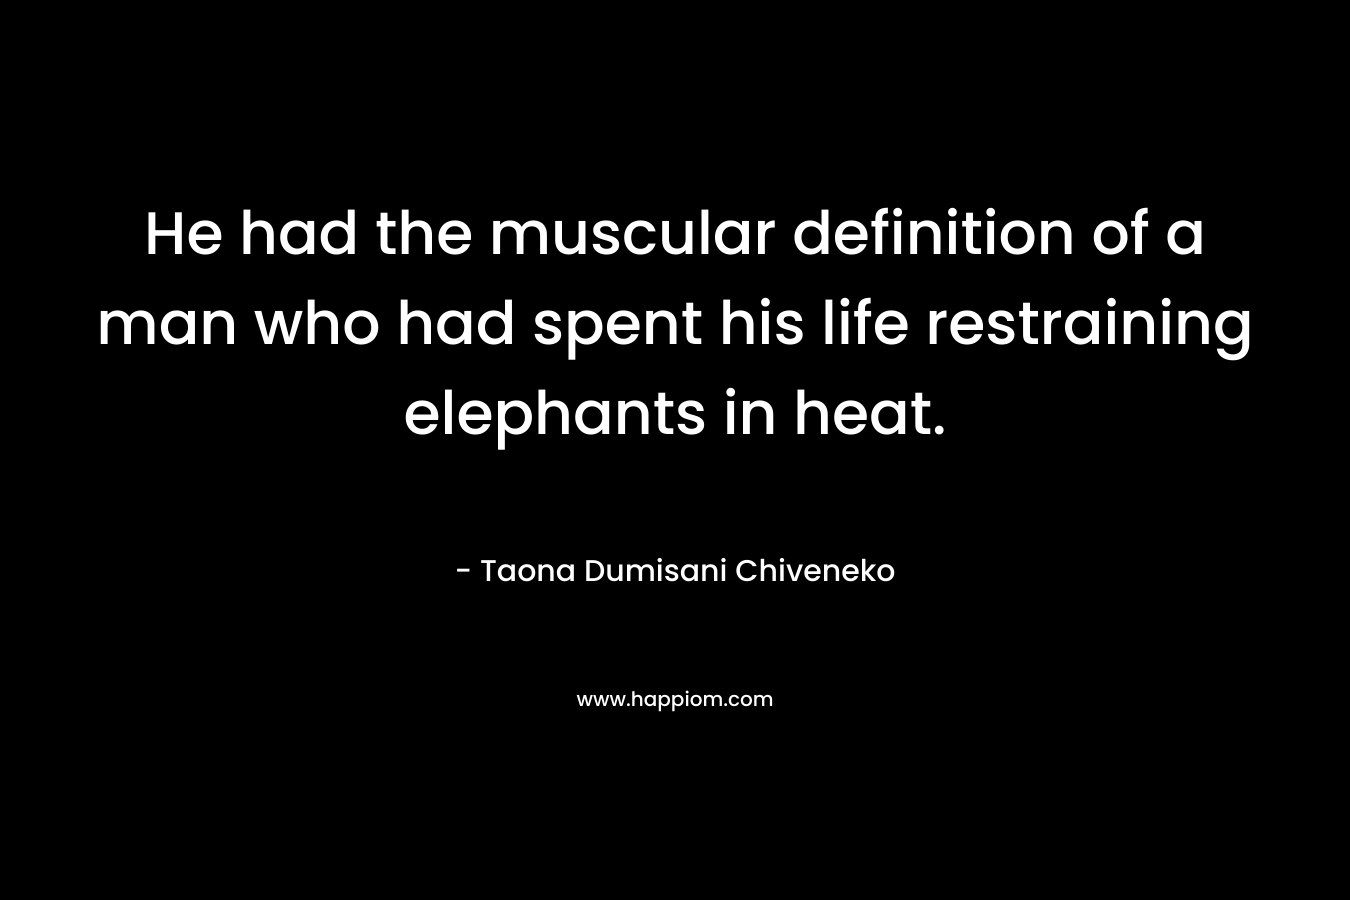 He had the muscular definition of a man who had spent his life restraining elephants in heat.